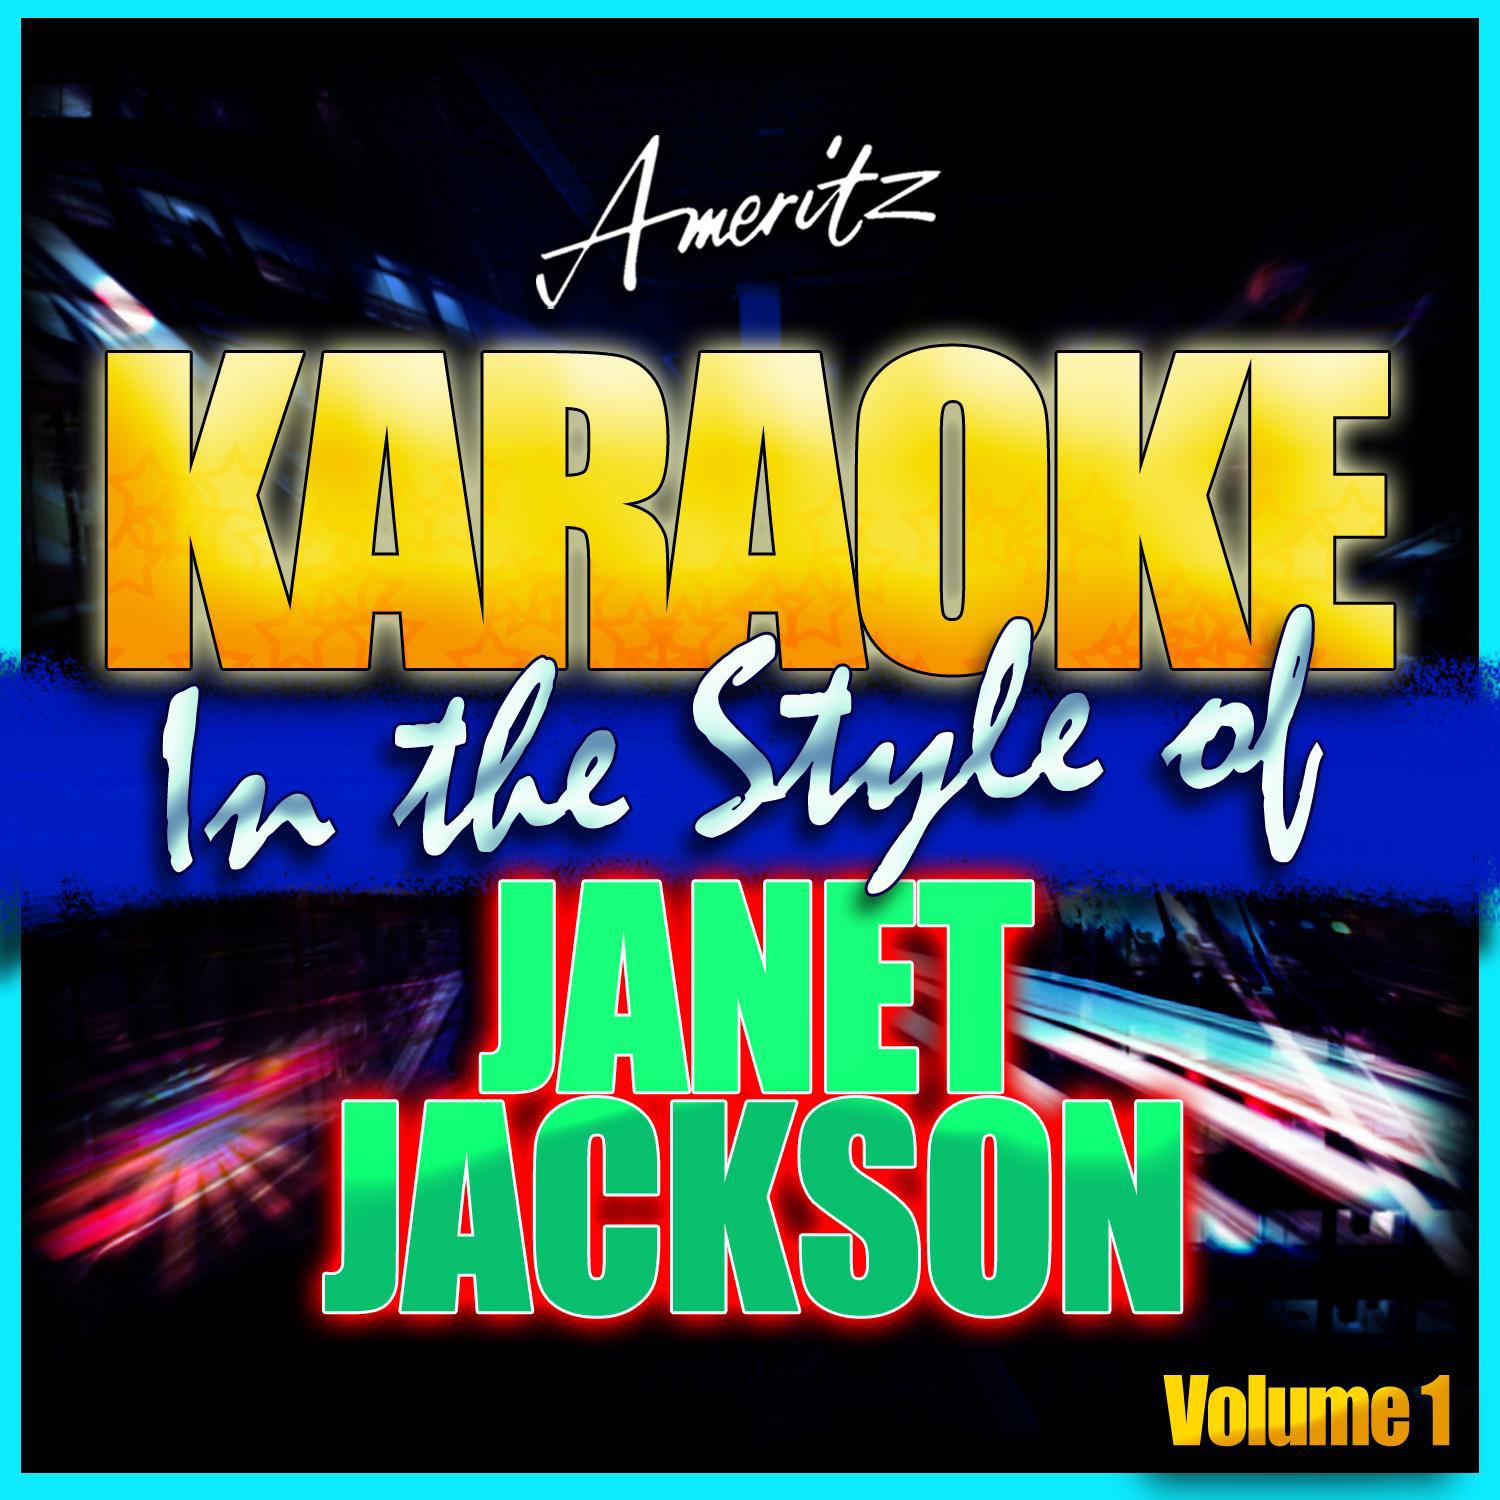 All Nite (Don't Stop) [In the Style of Janet Jackson] [Karaoke Version]